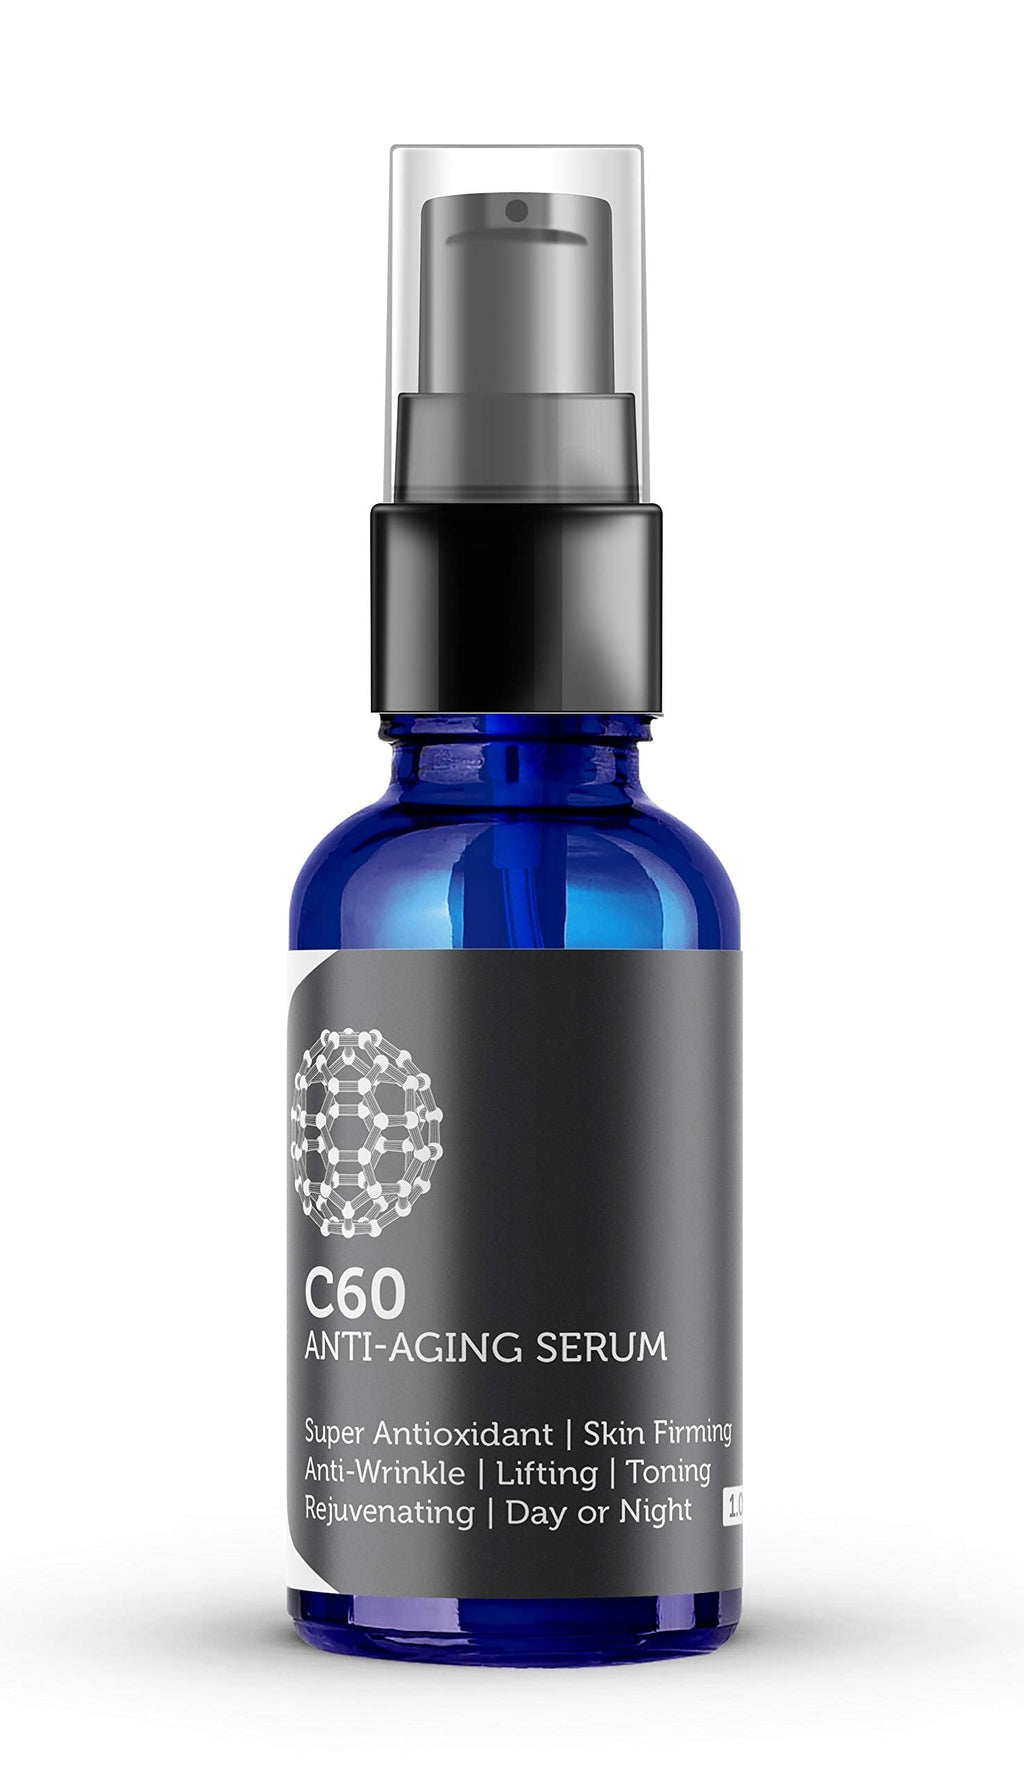 [Australia] - PureC60OliveOil Carbon 60 Anti-Aging Serum 30ml with Hyaluronic Acid, Plant Stem Cells, Peptides, Vitamins B + C & Anti Aging Wrinkle Complexes for Men & Women Made With Organic Ingredients 